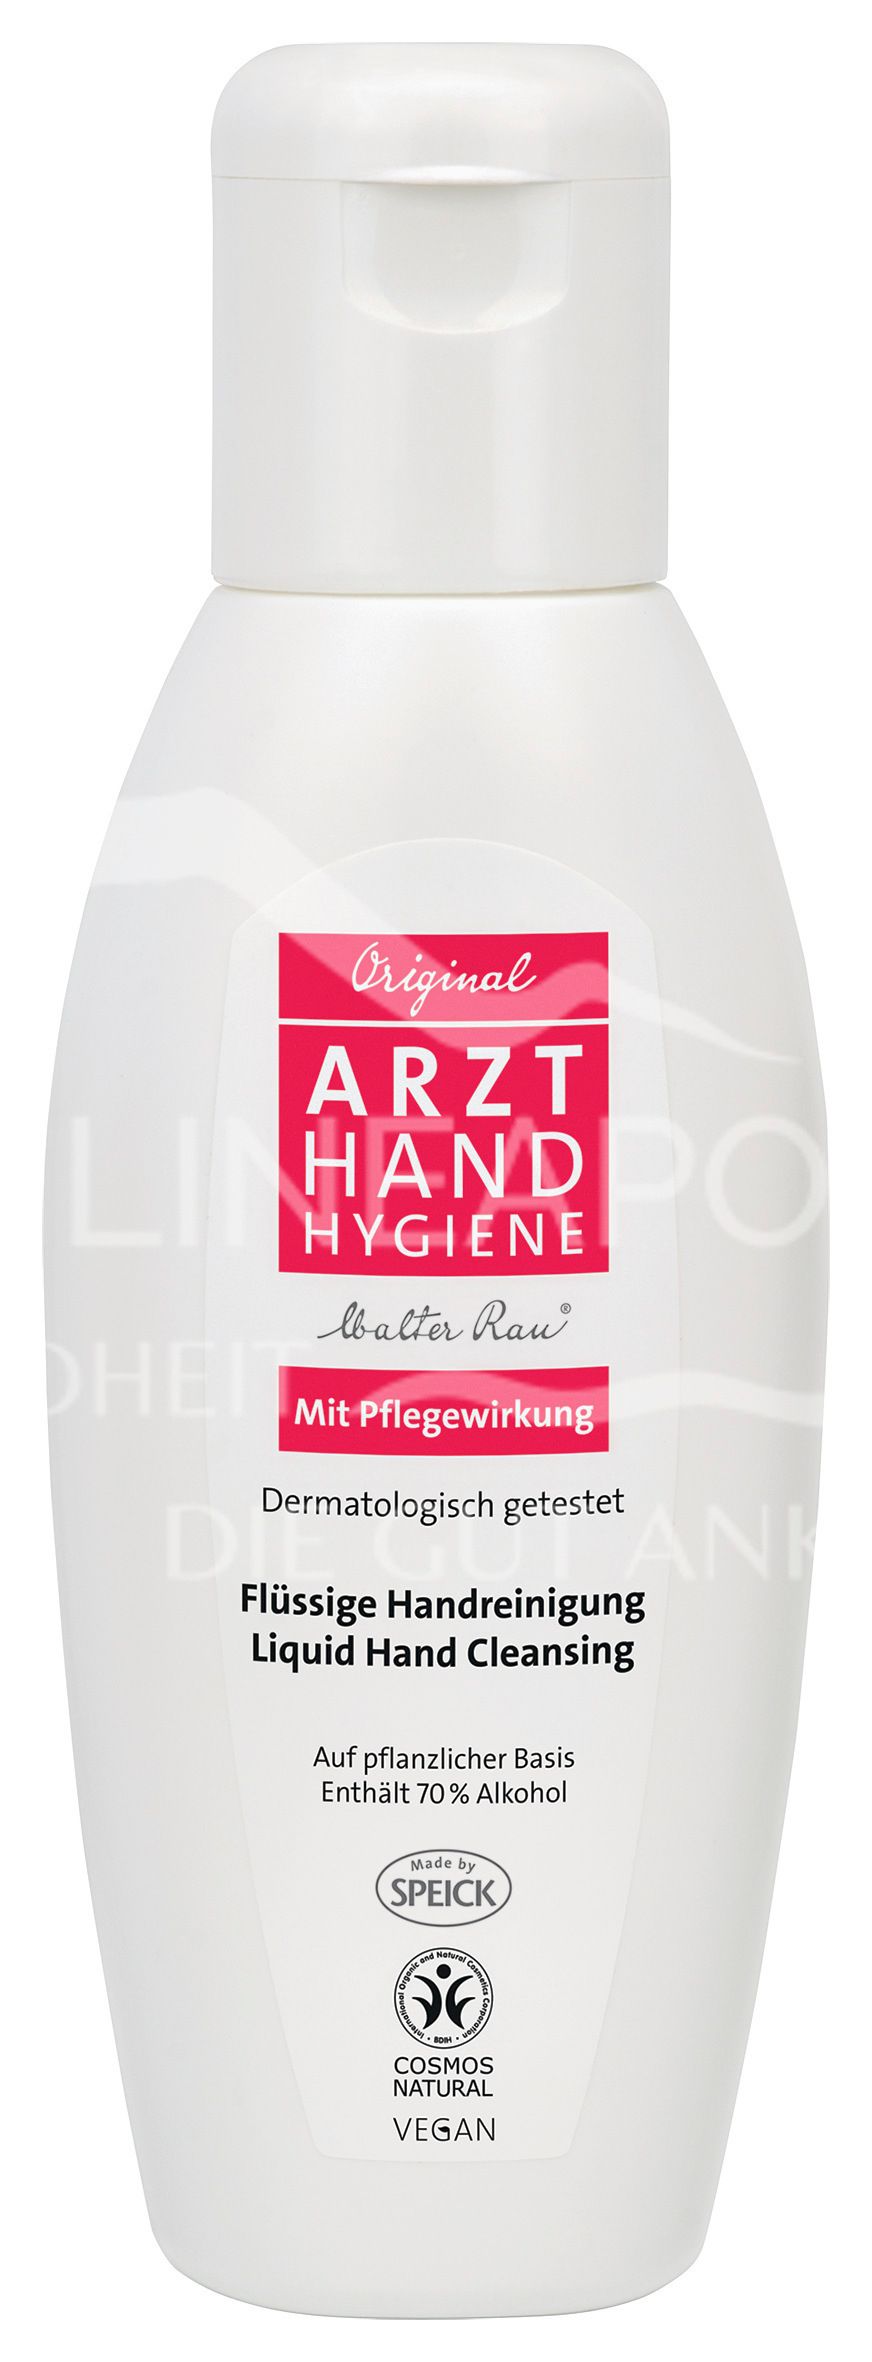 Made by Speick Arzt Handhygiene